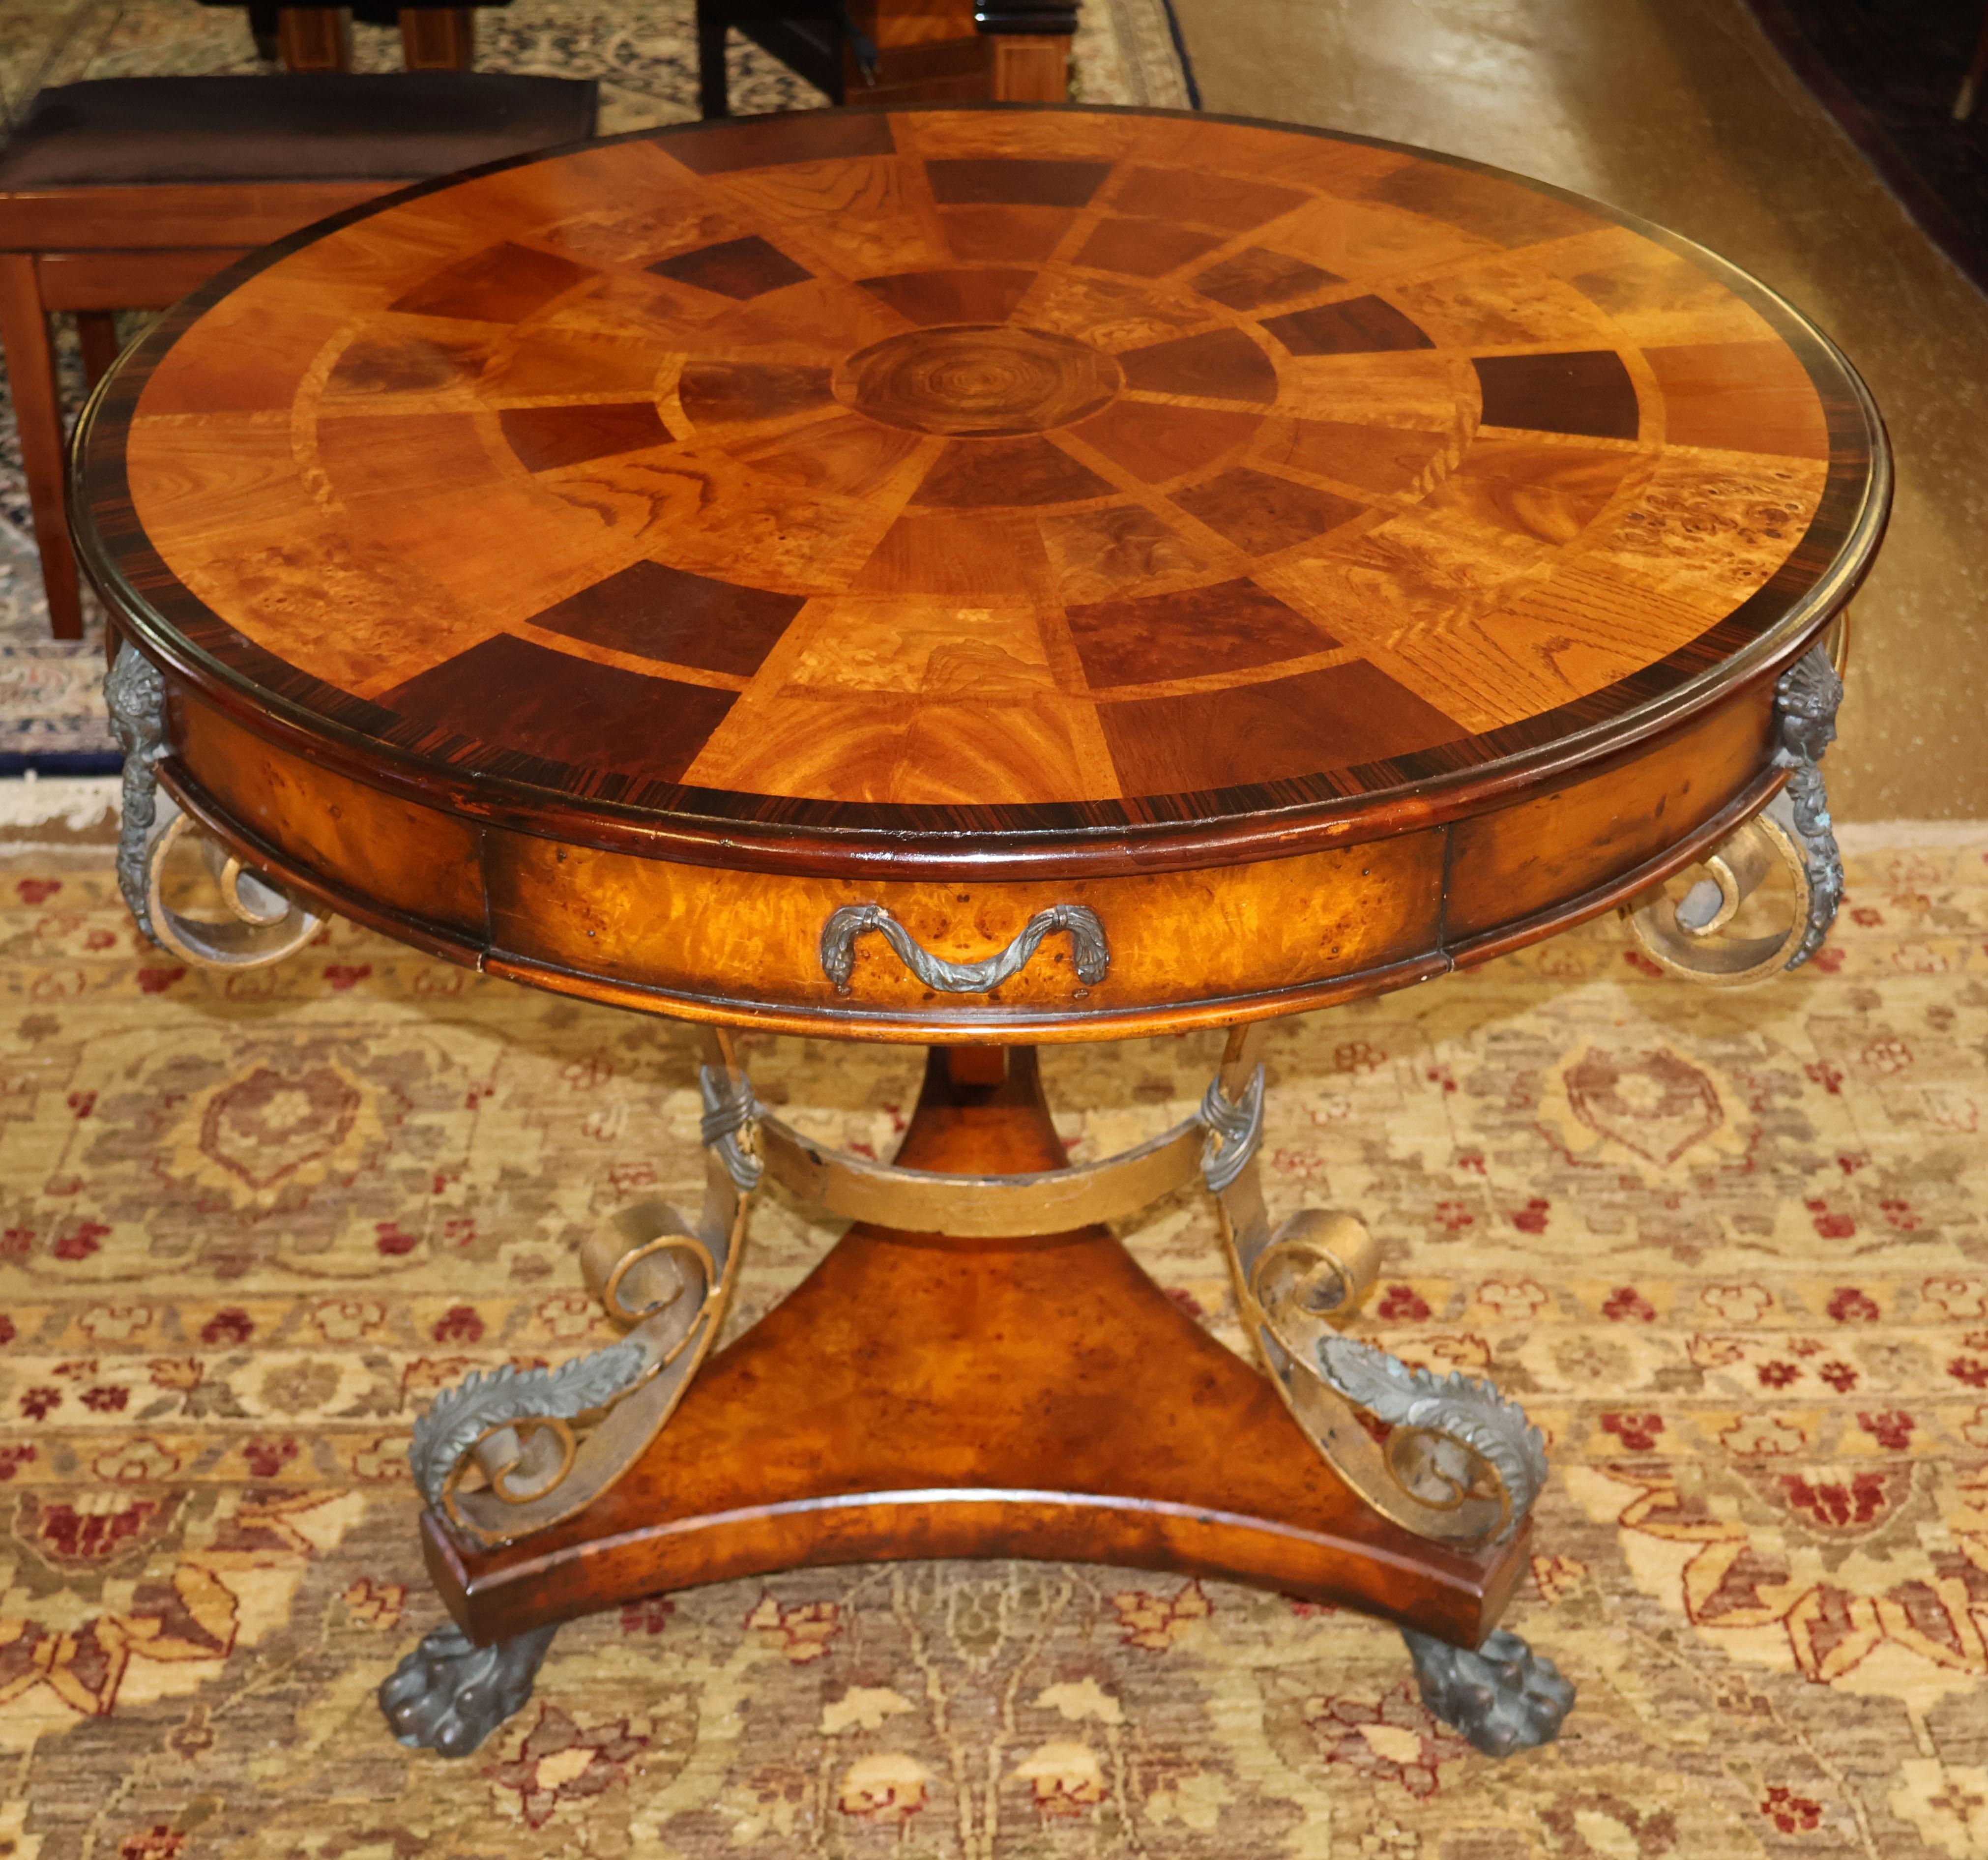 Egyptian Revival Theodore Alexander Caryatid Iron & Inlaid Walnut Burl Round Drum Center Table For Sale